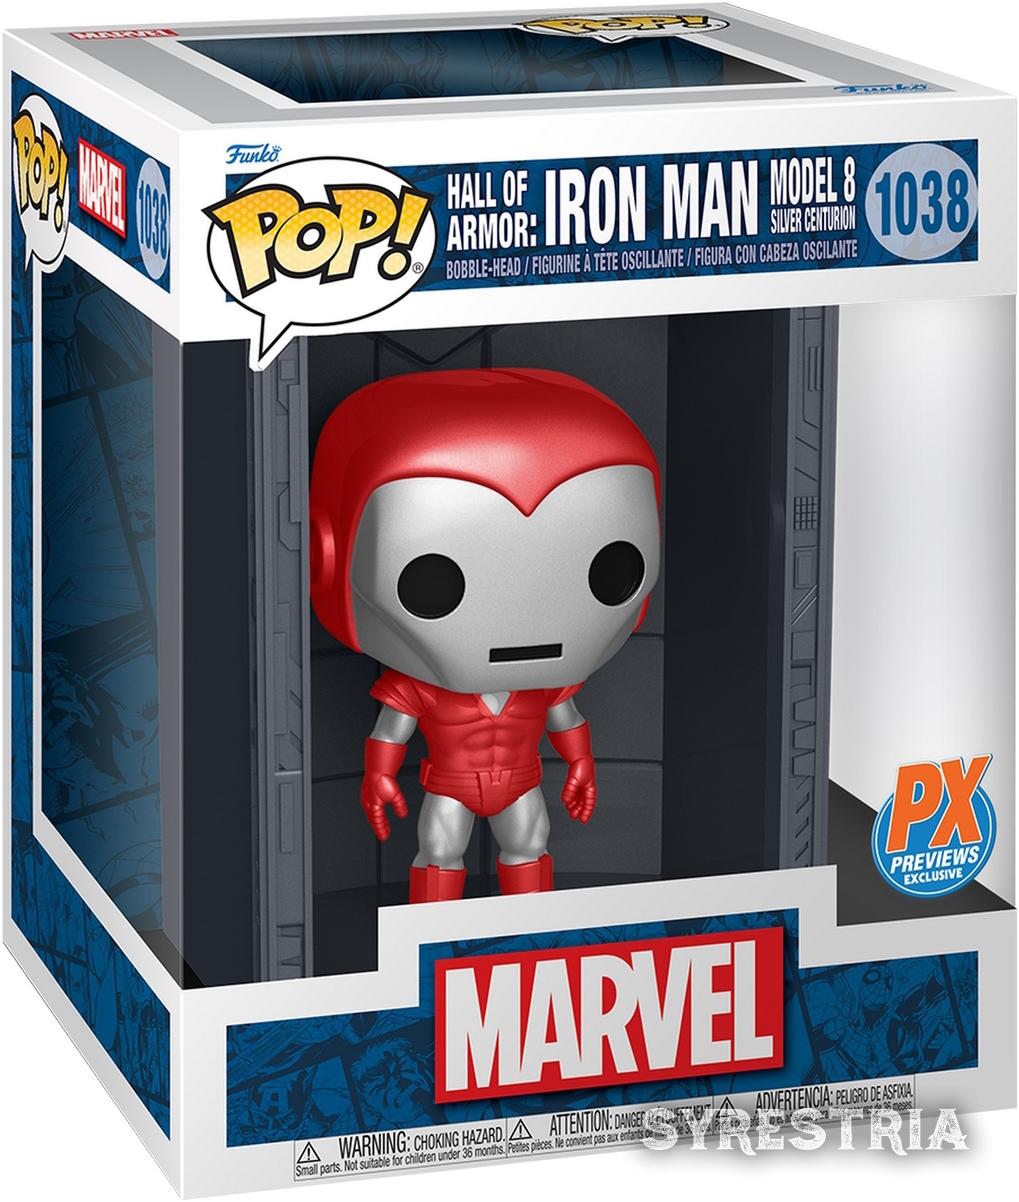 Marvel - Hall Of Armor Iron Man Model 8 Silver Centurion 1038 PX Previews Exclusive - Funko Pop! Deluxe